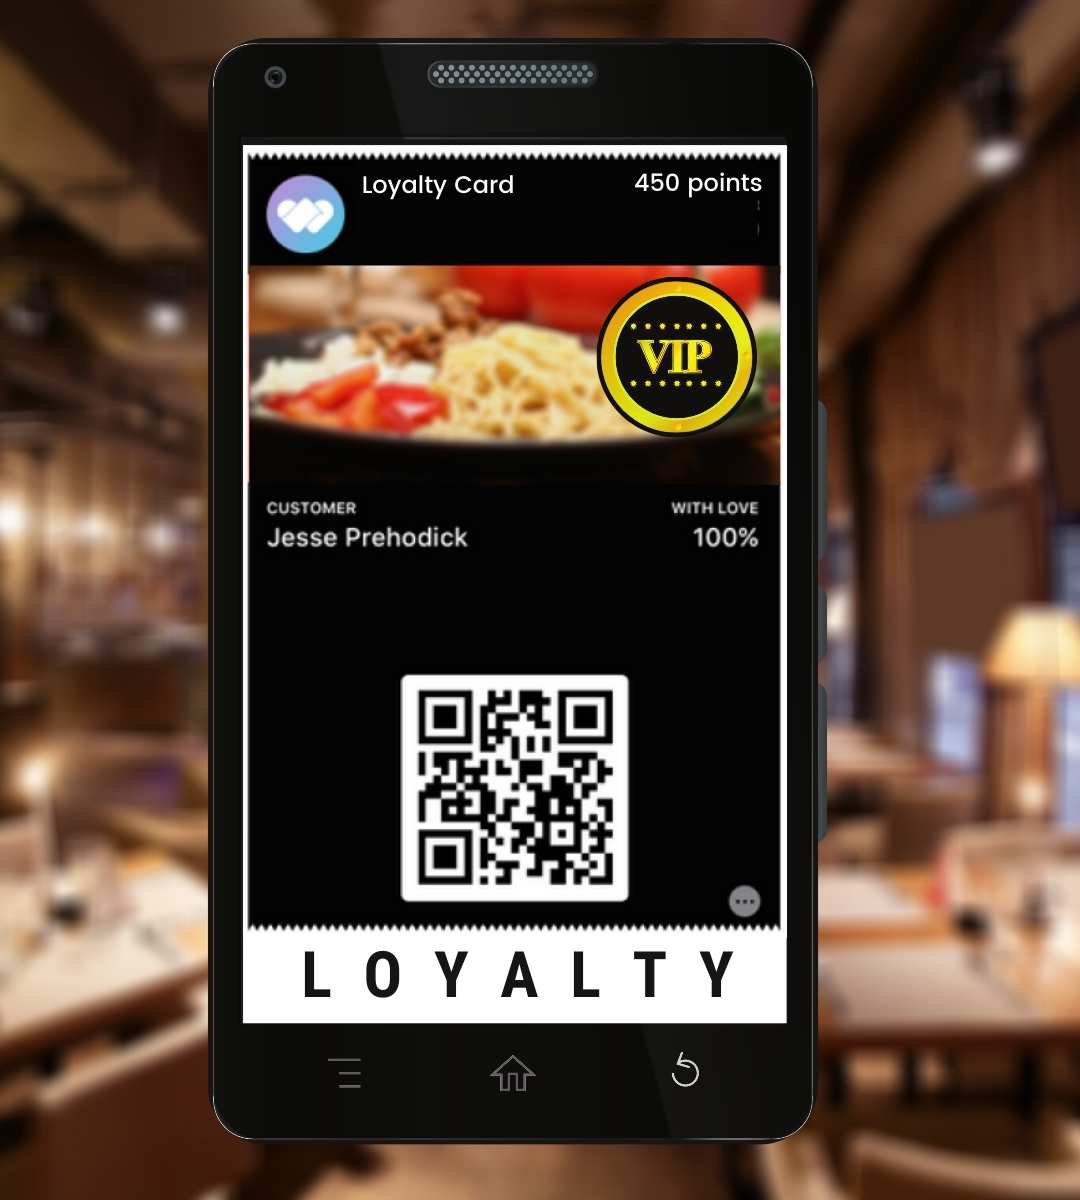 a digital coupon being shown on a smartphone